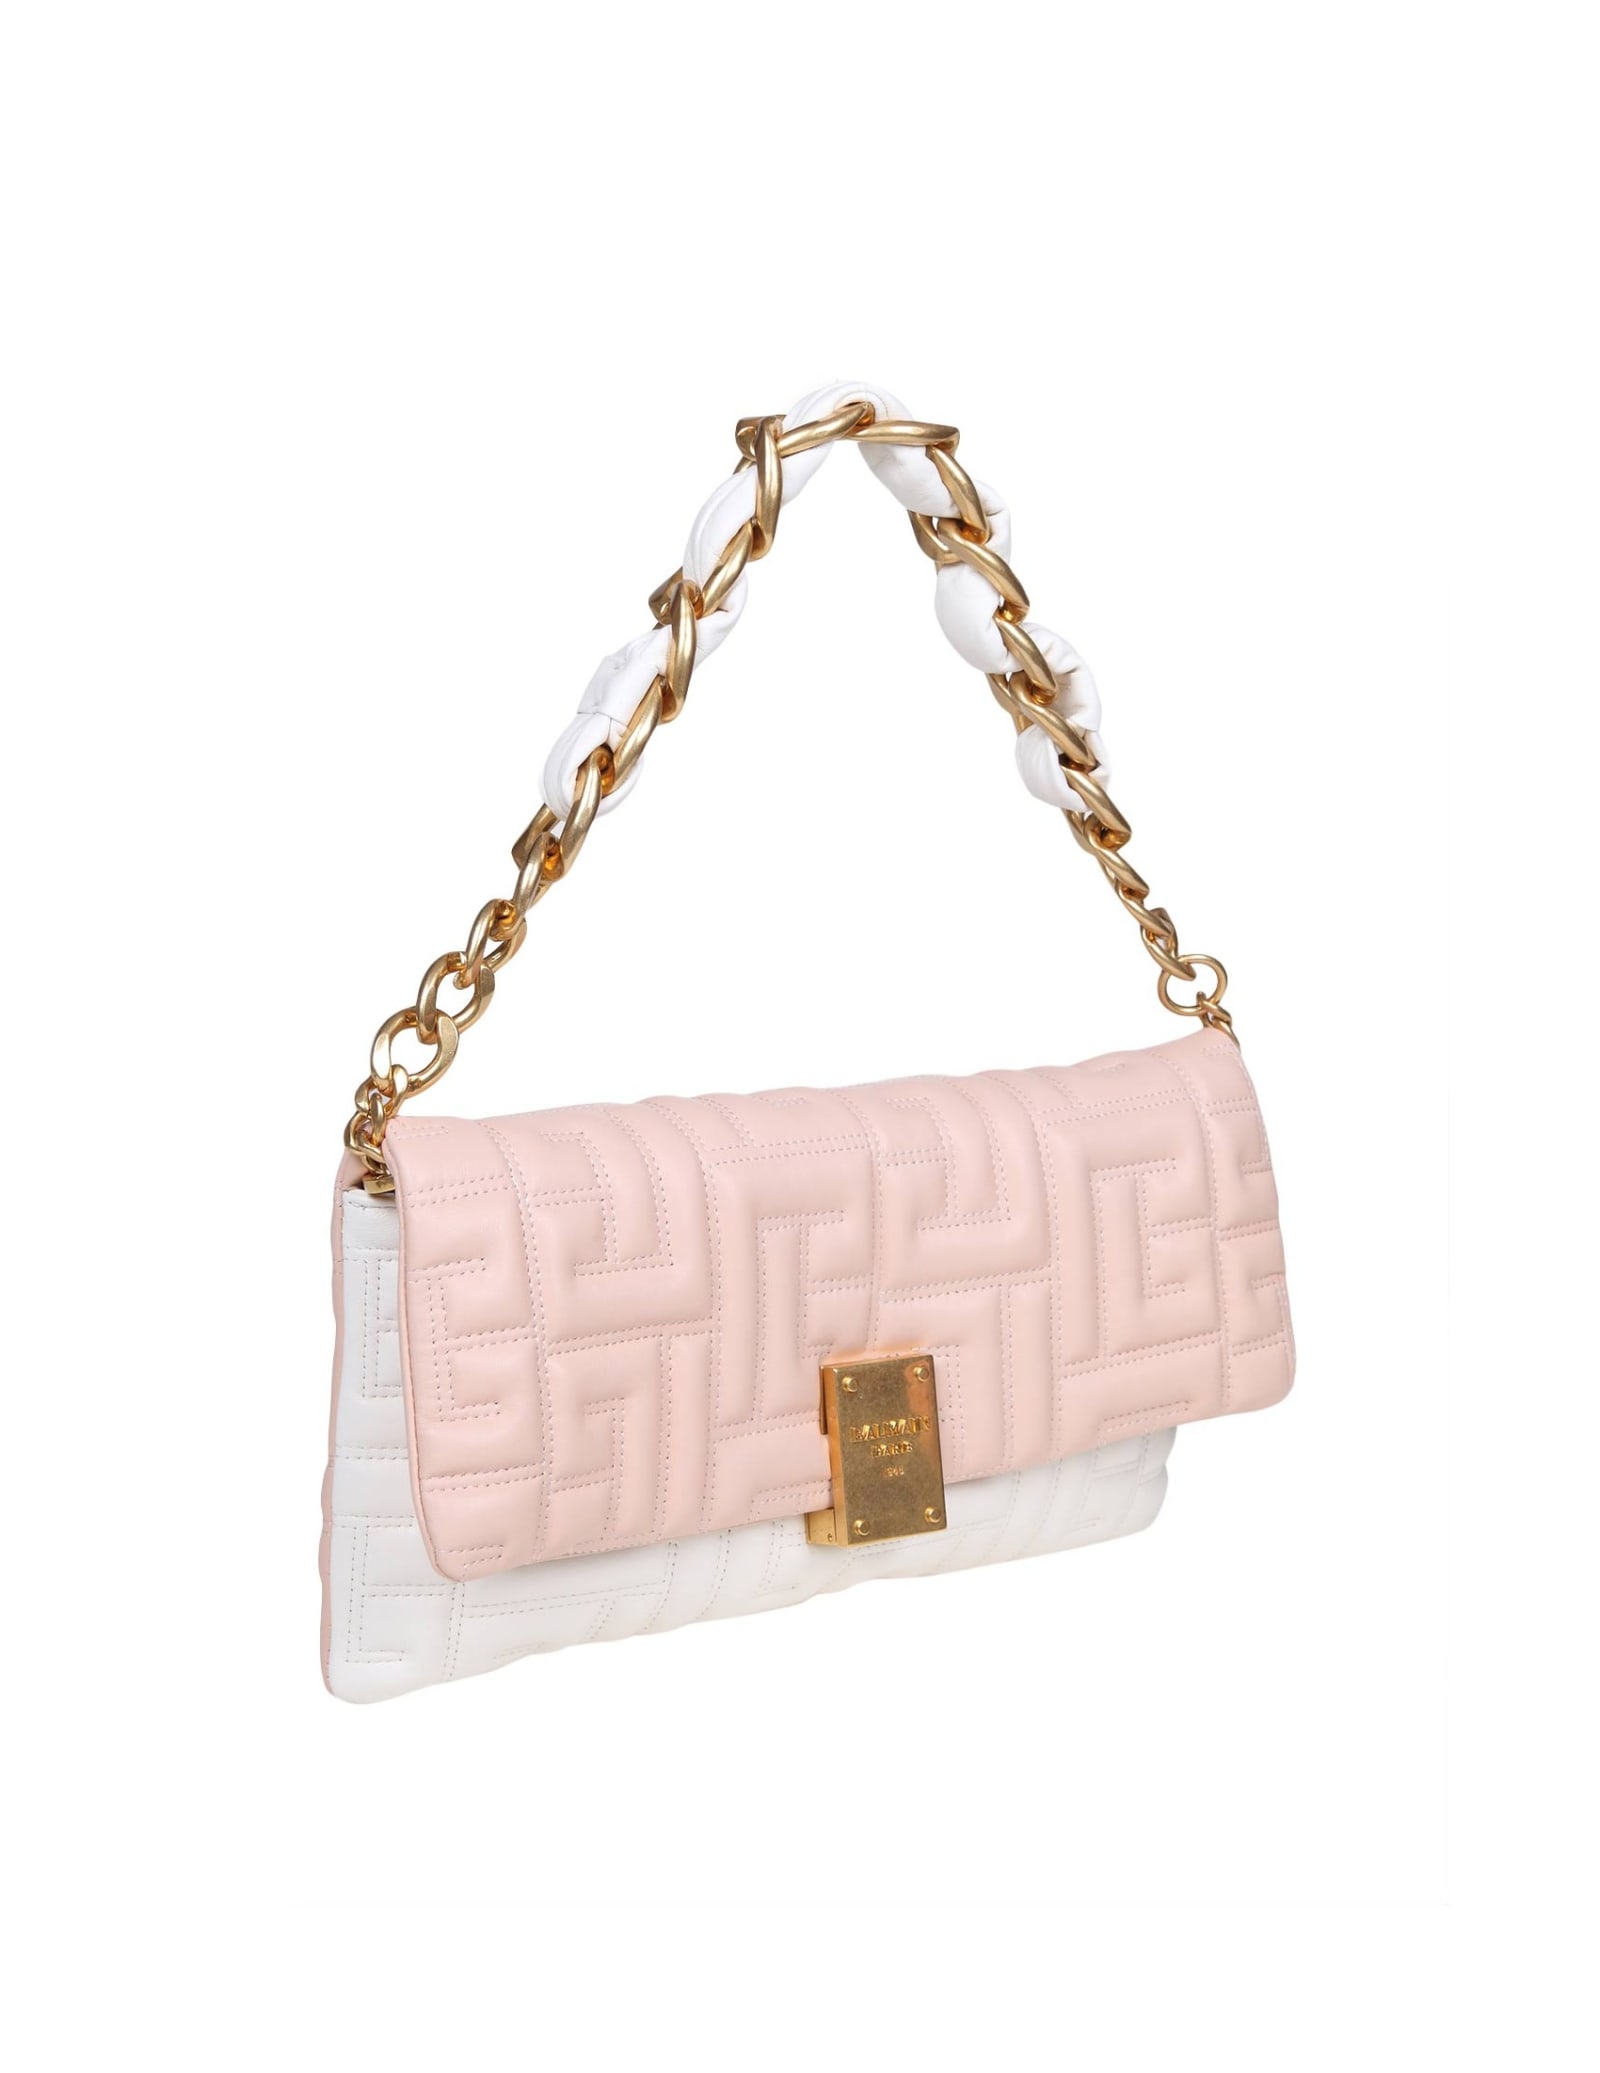 Shop Balmain 1945 Soft Clutch Bag In Monogram Quilted Leather In Creme/nude